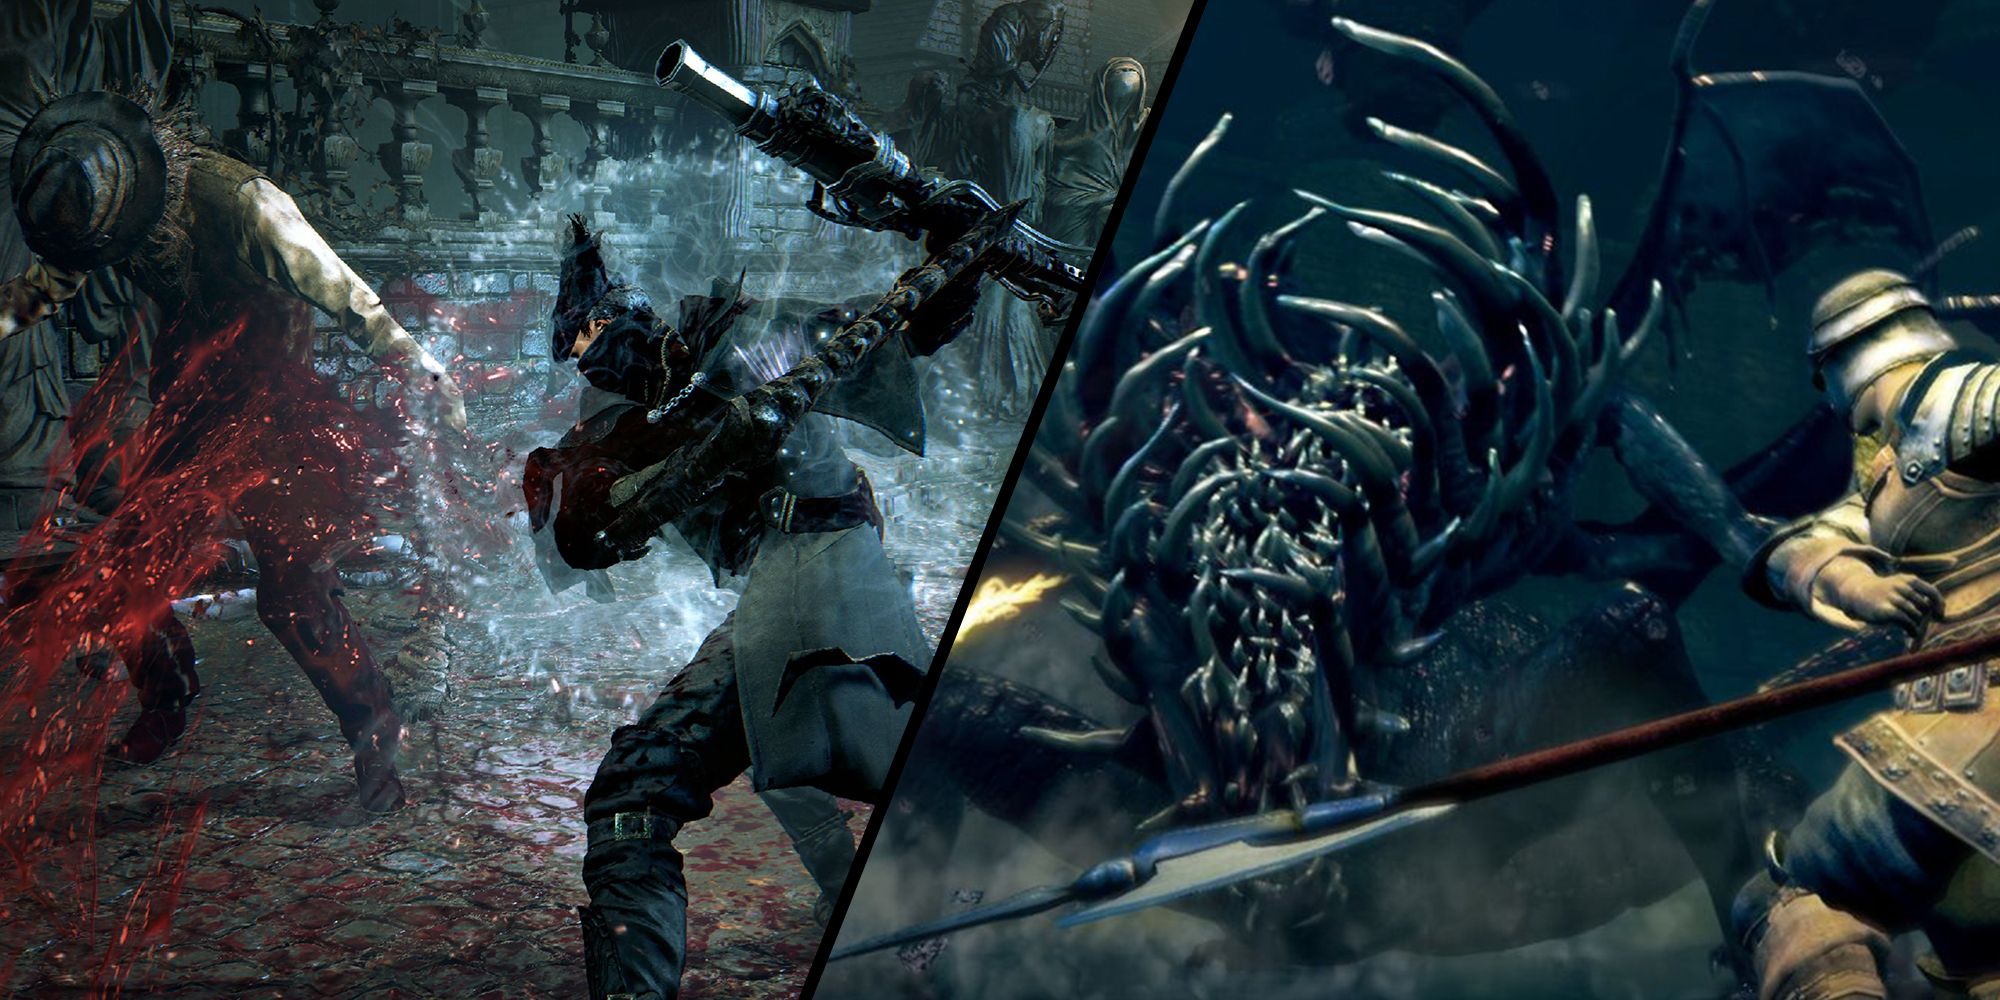 Bloodborne - Two Screenshots Of Combat From Both Dark Souls And Bloodborne To Compare